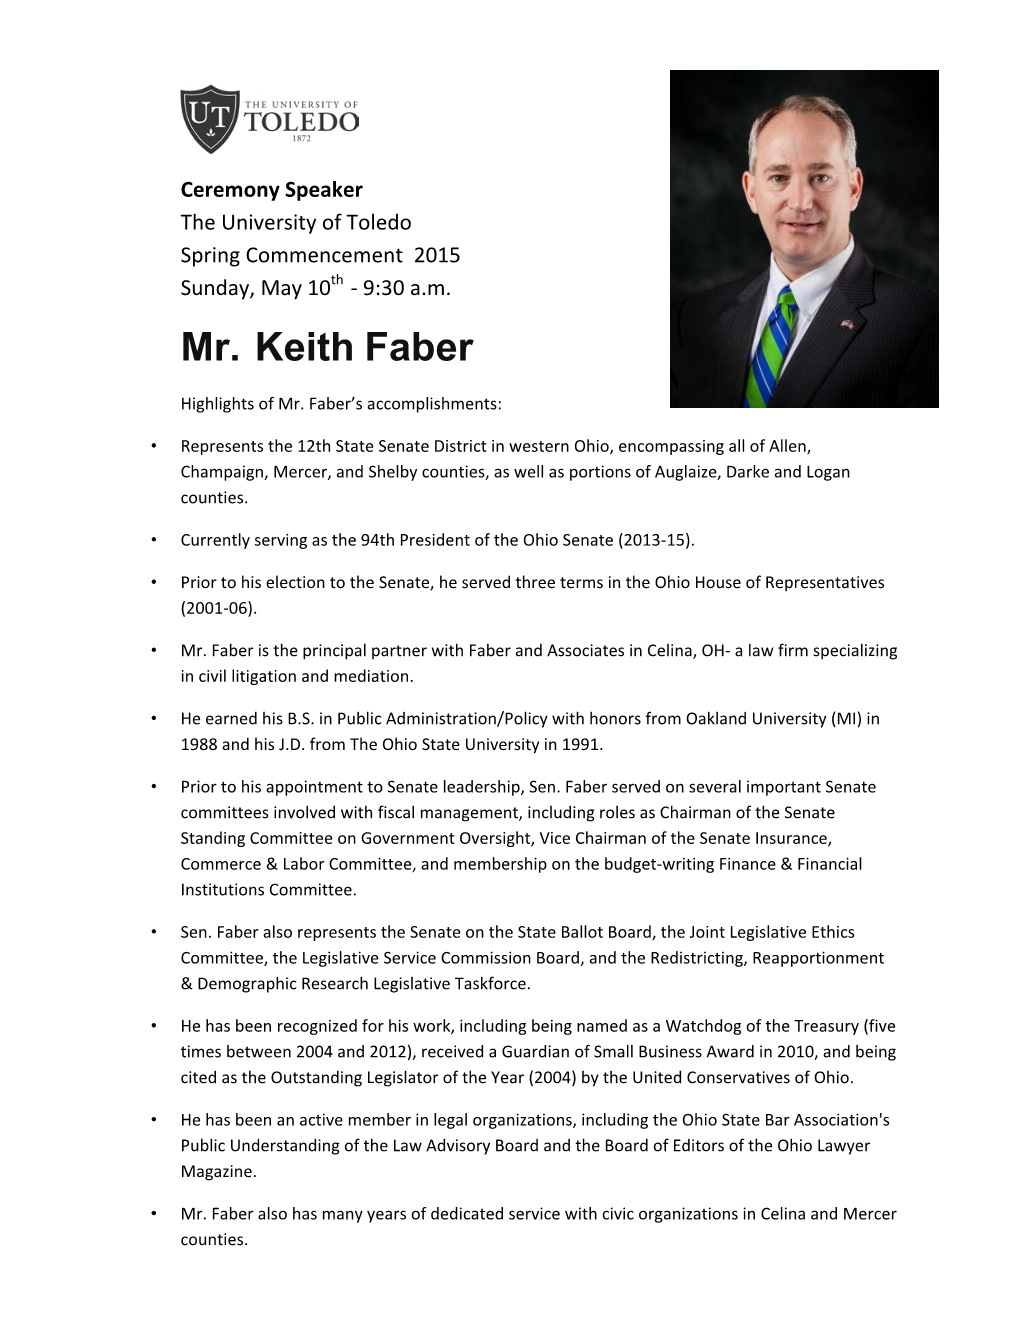 Mr. Keith Faber